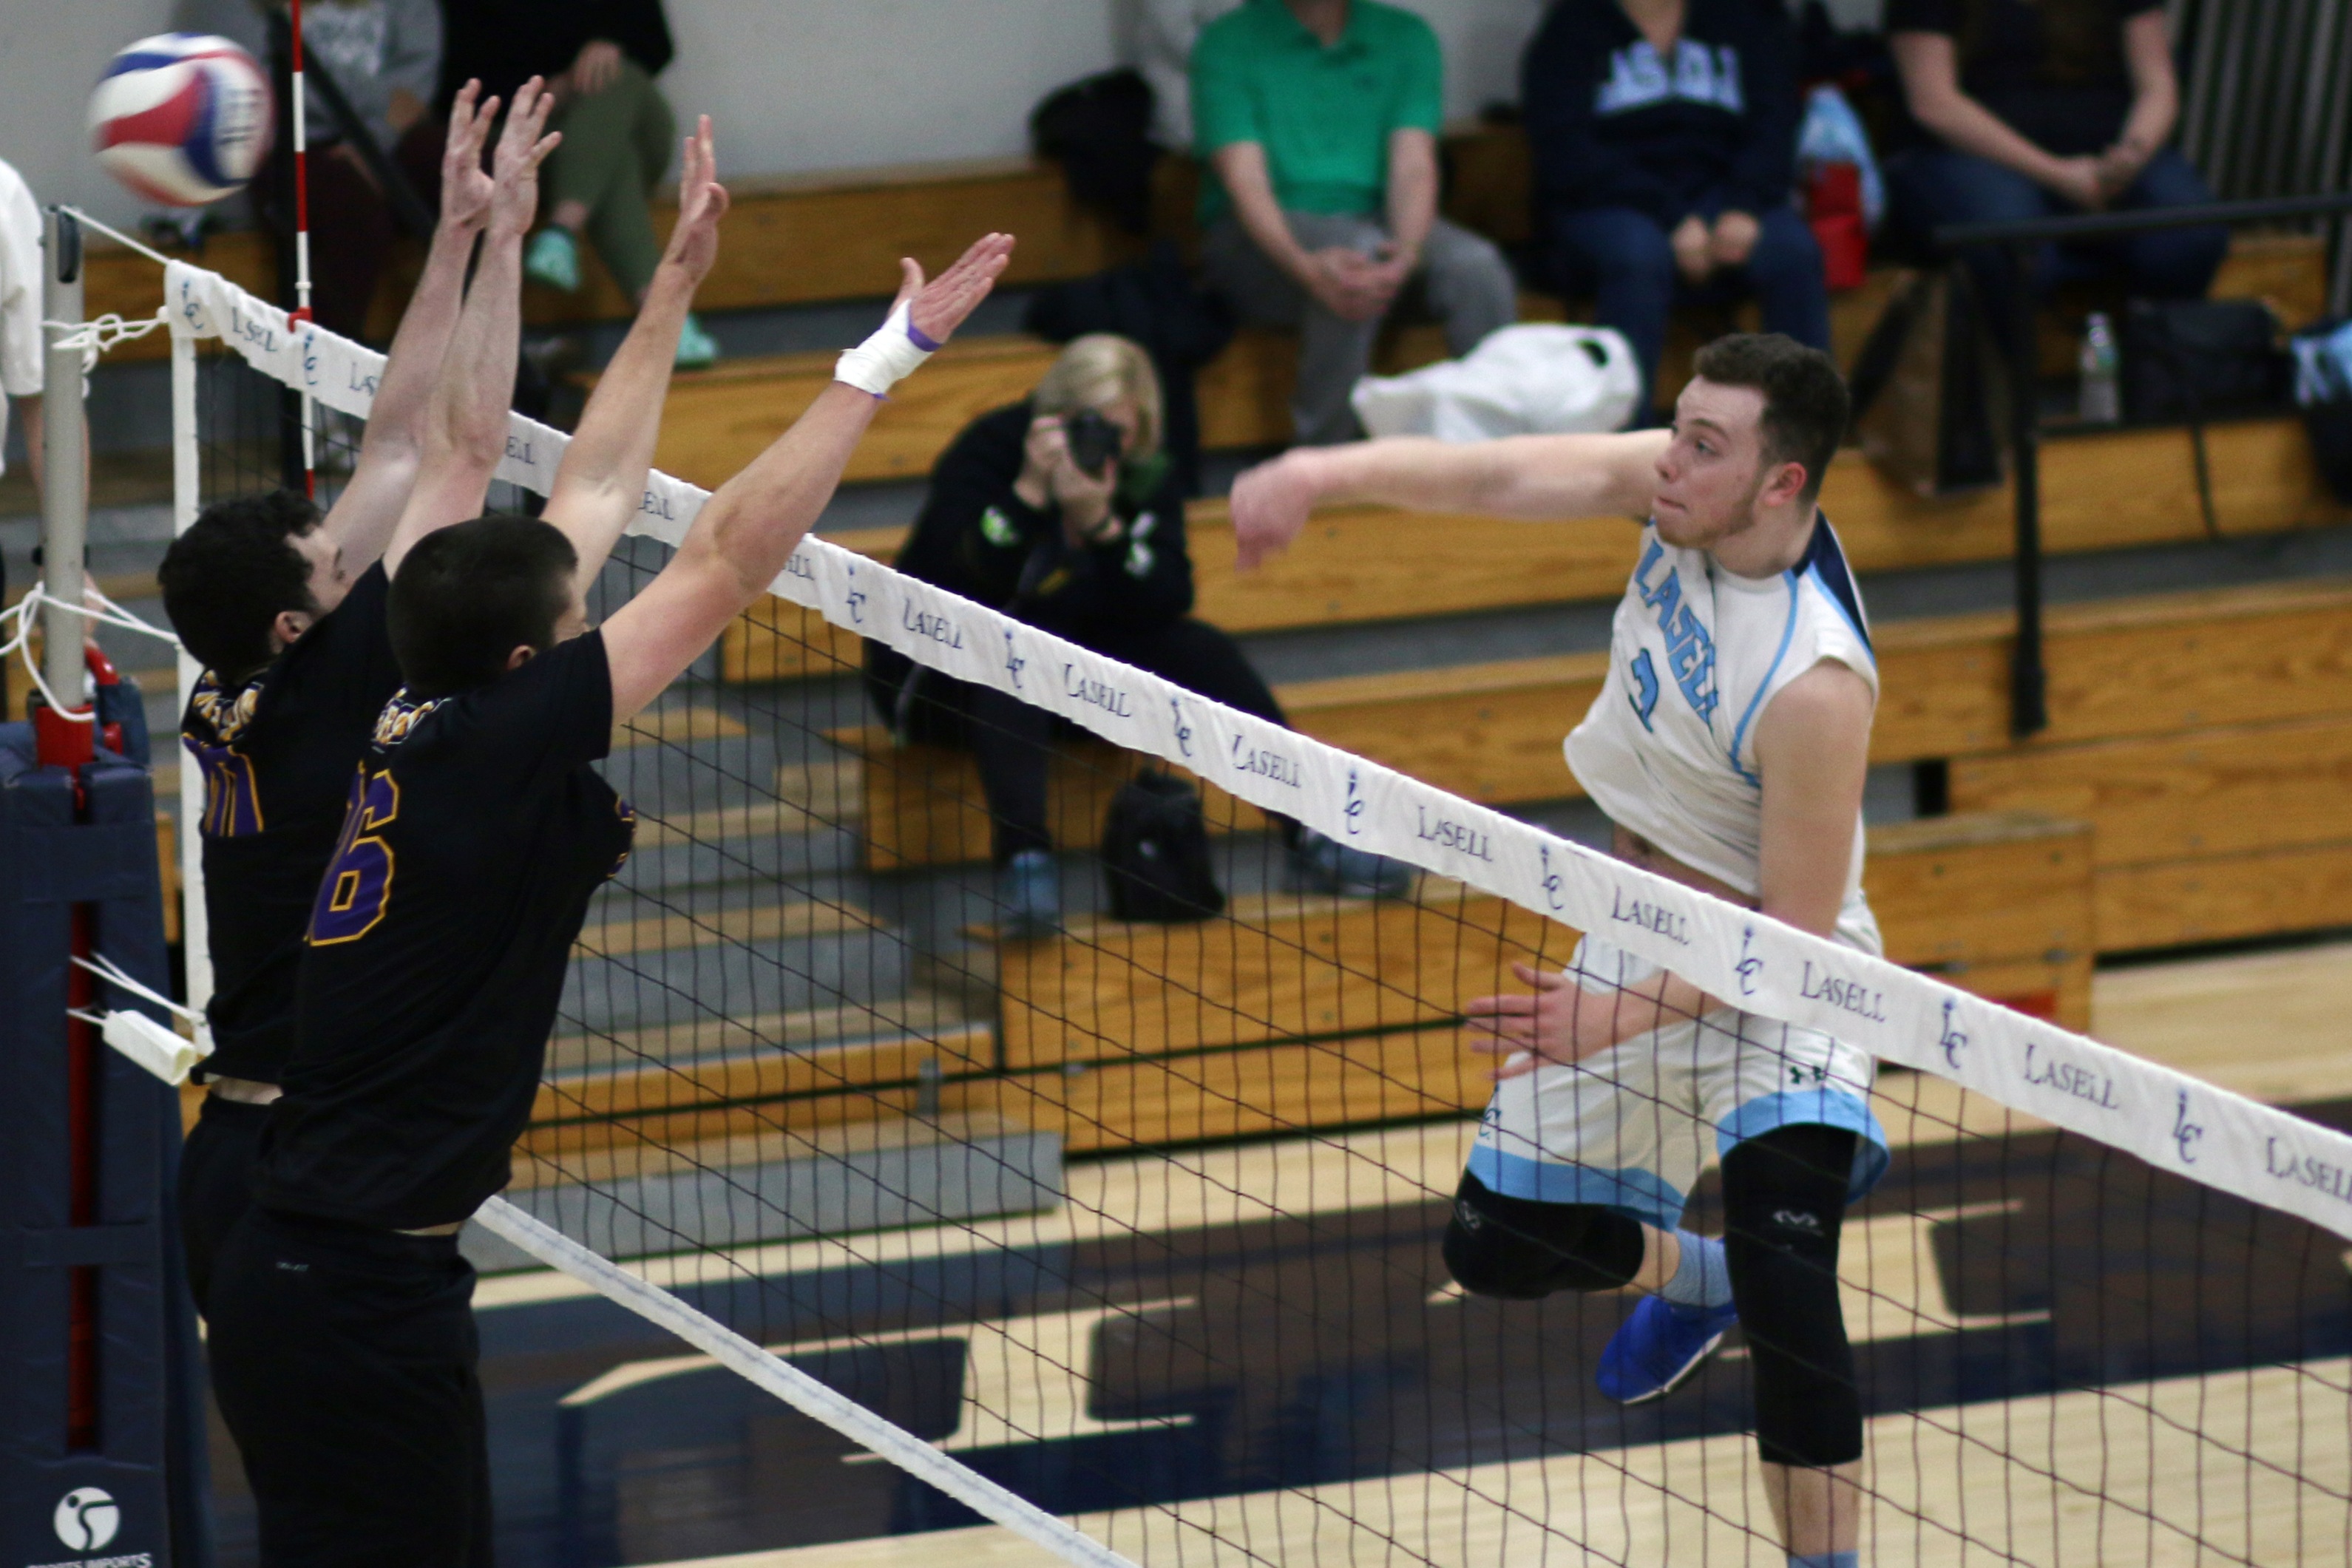 Lasell Men’s Volleyball sweeps Mount Ida